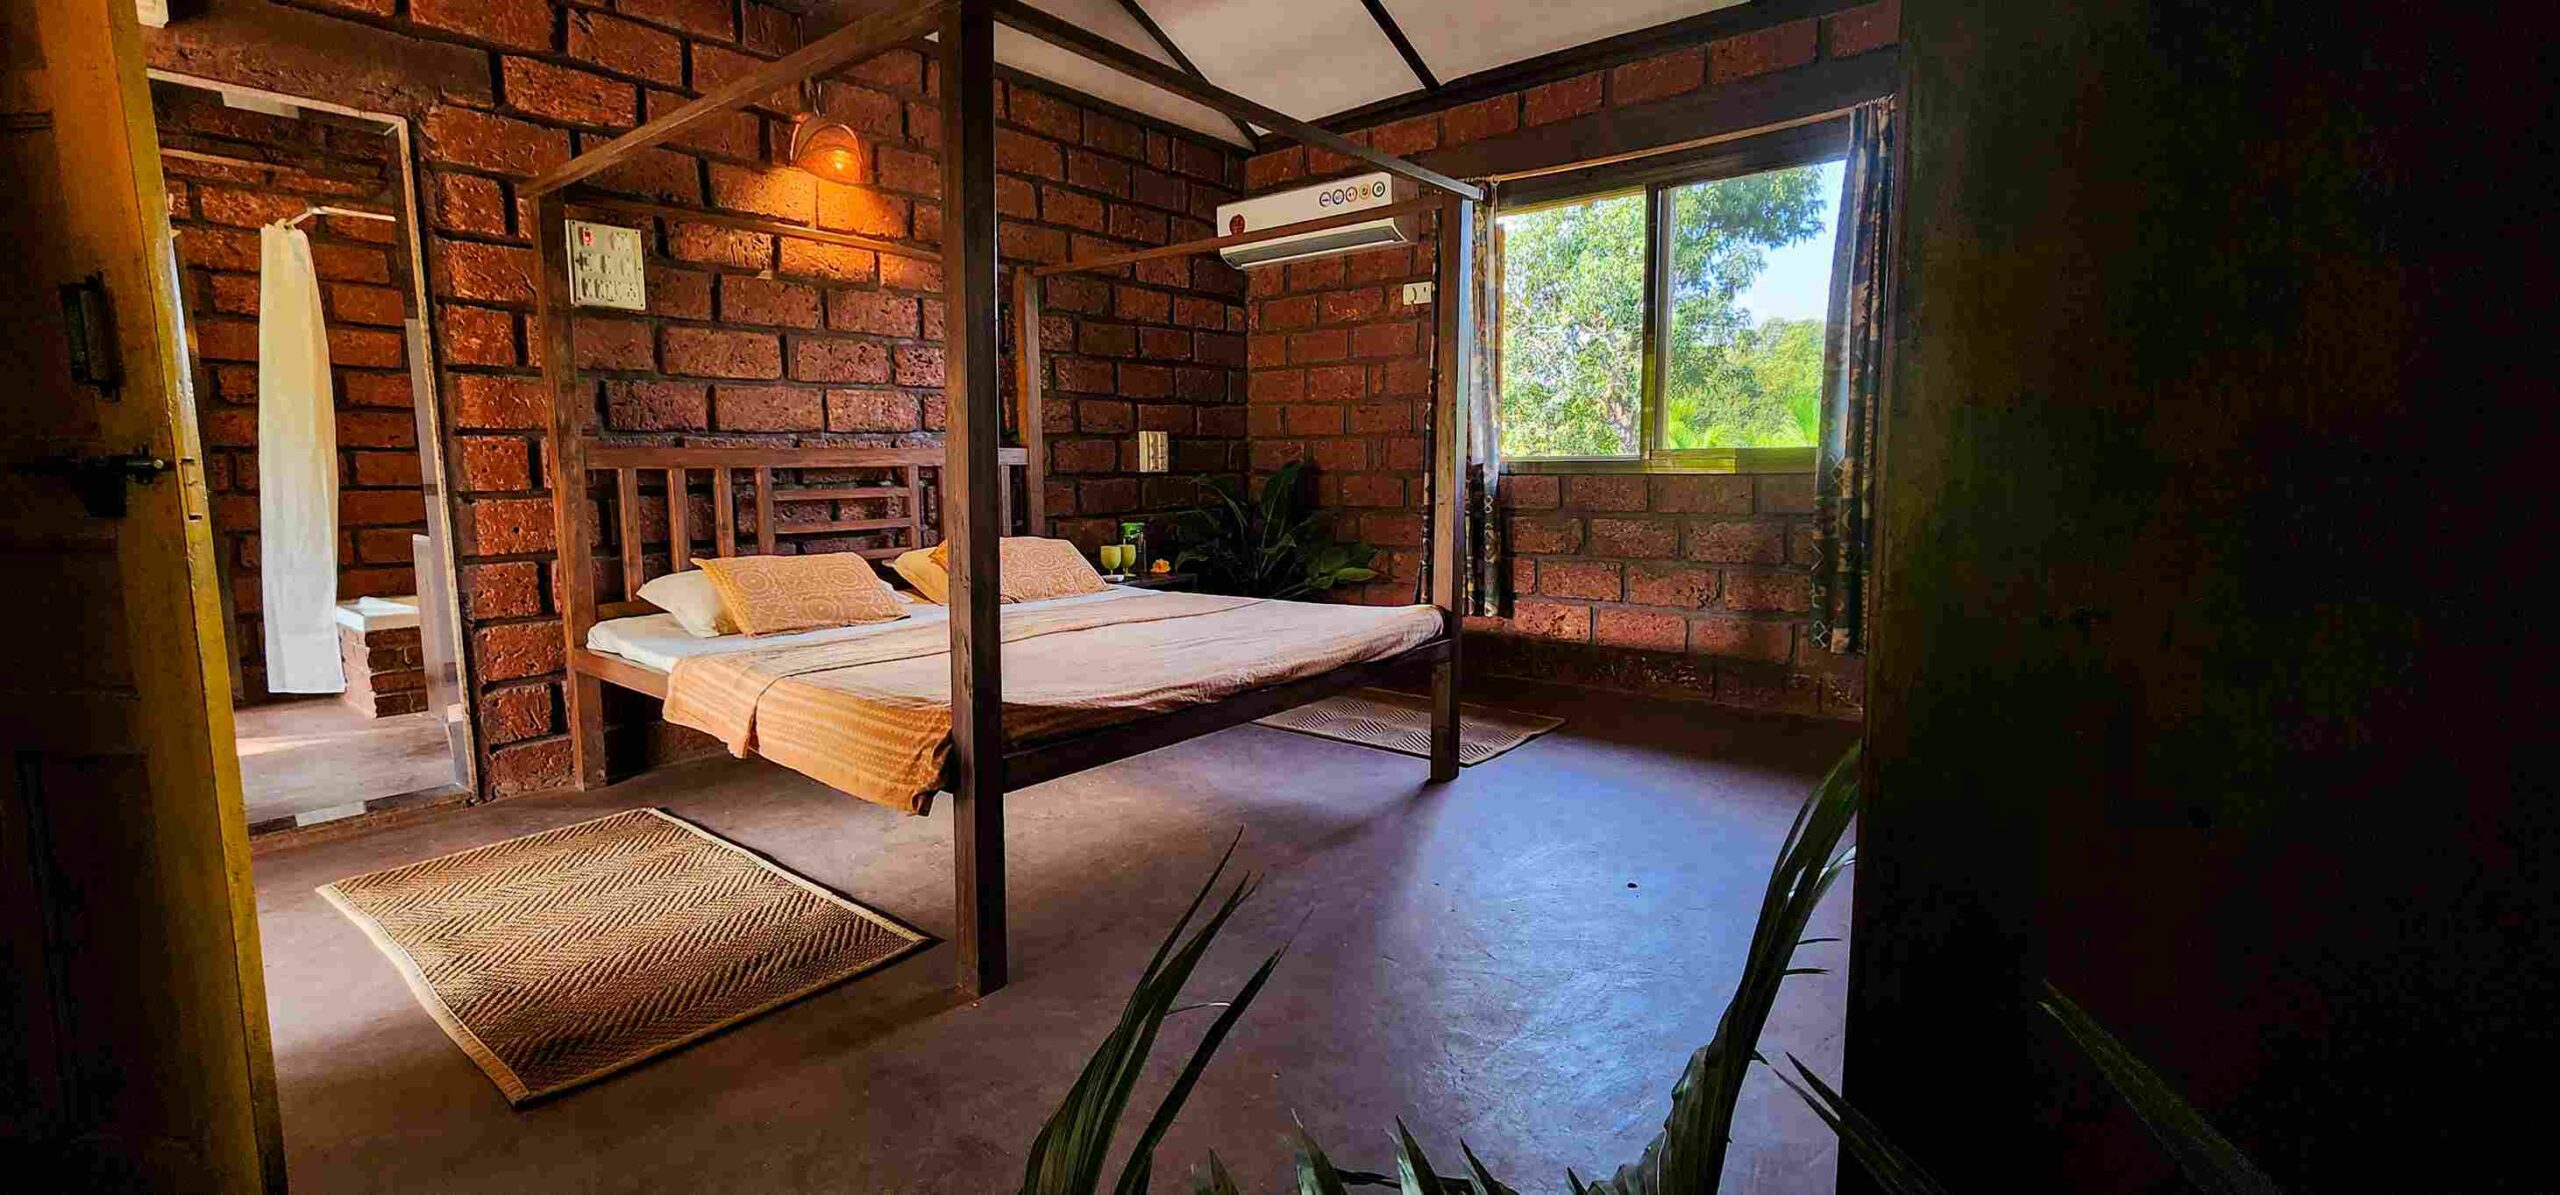 The rooms at Ayra Farms are well-ventilated and have a quaint vibe